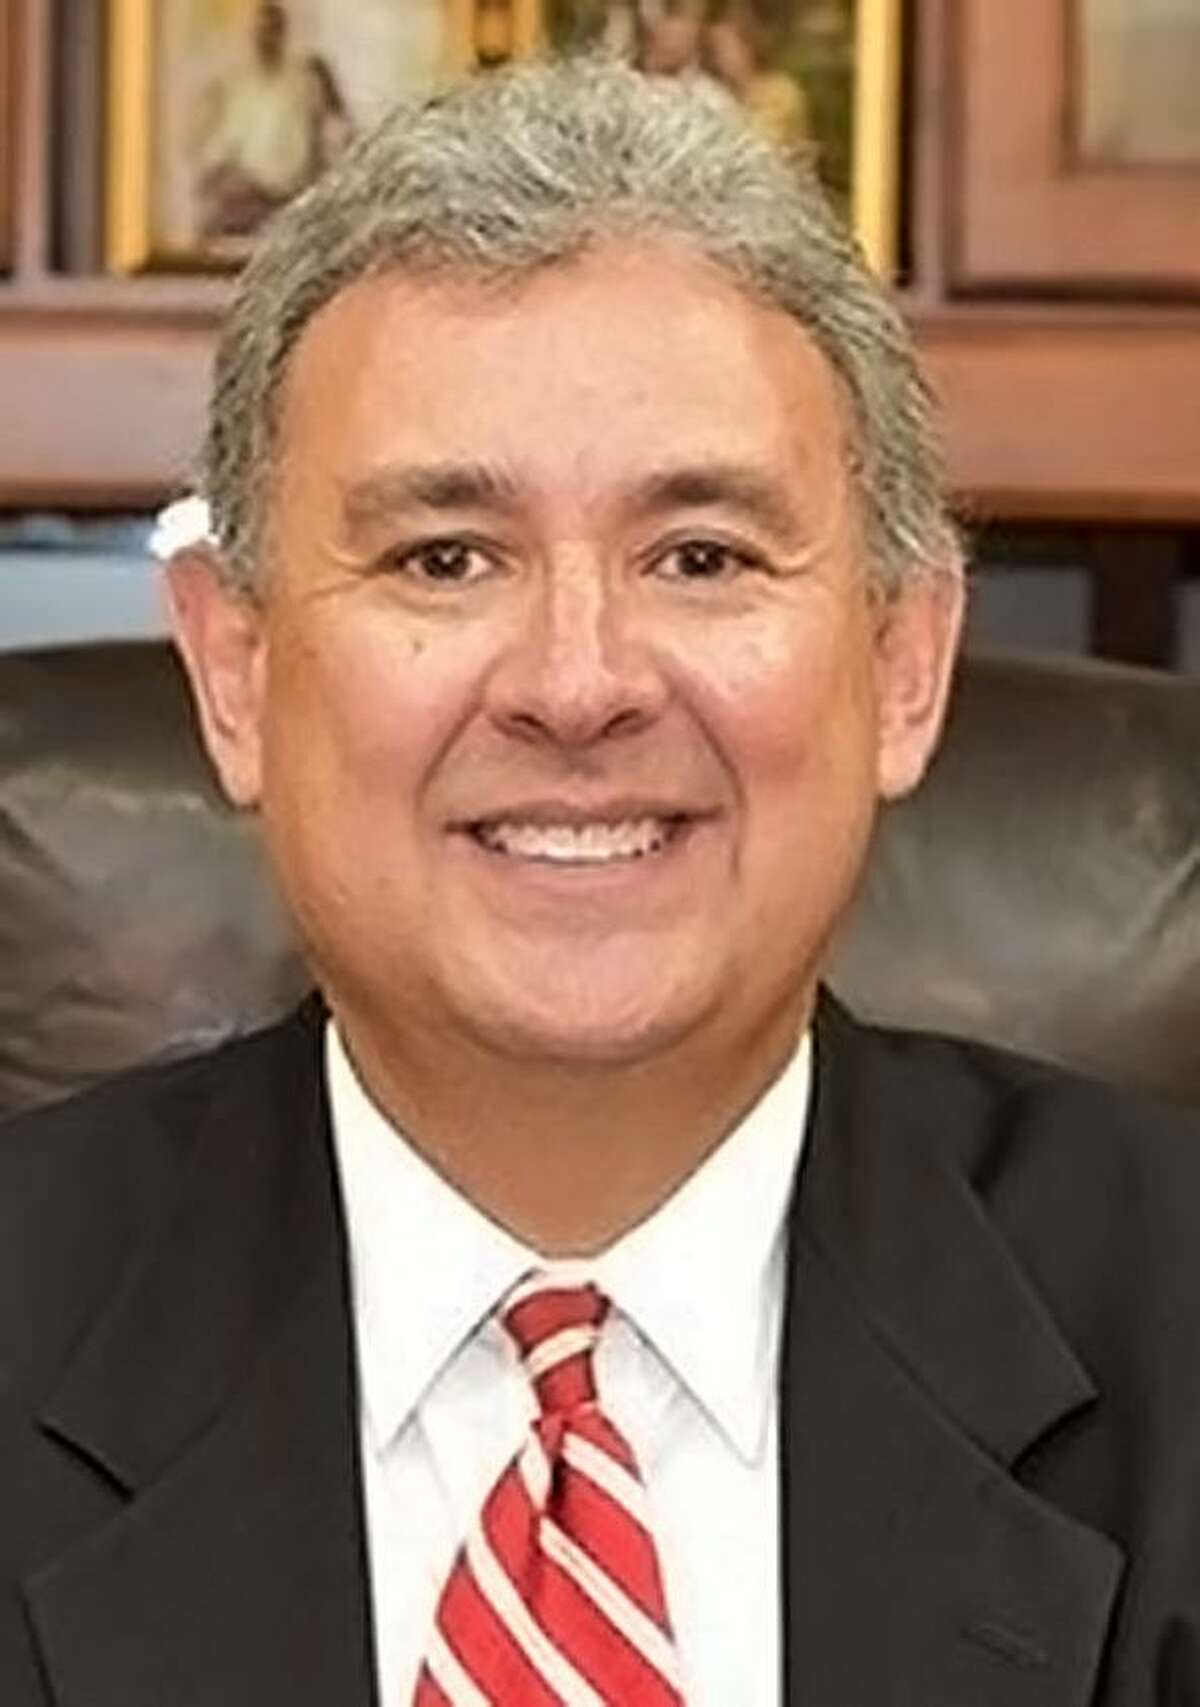 Joe Gonzales, candidate for Bexar County District Attorney.